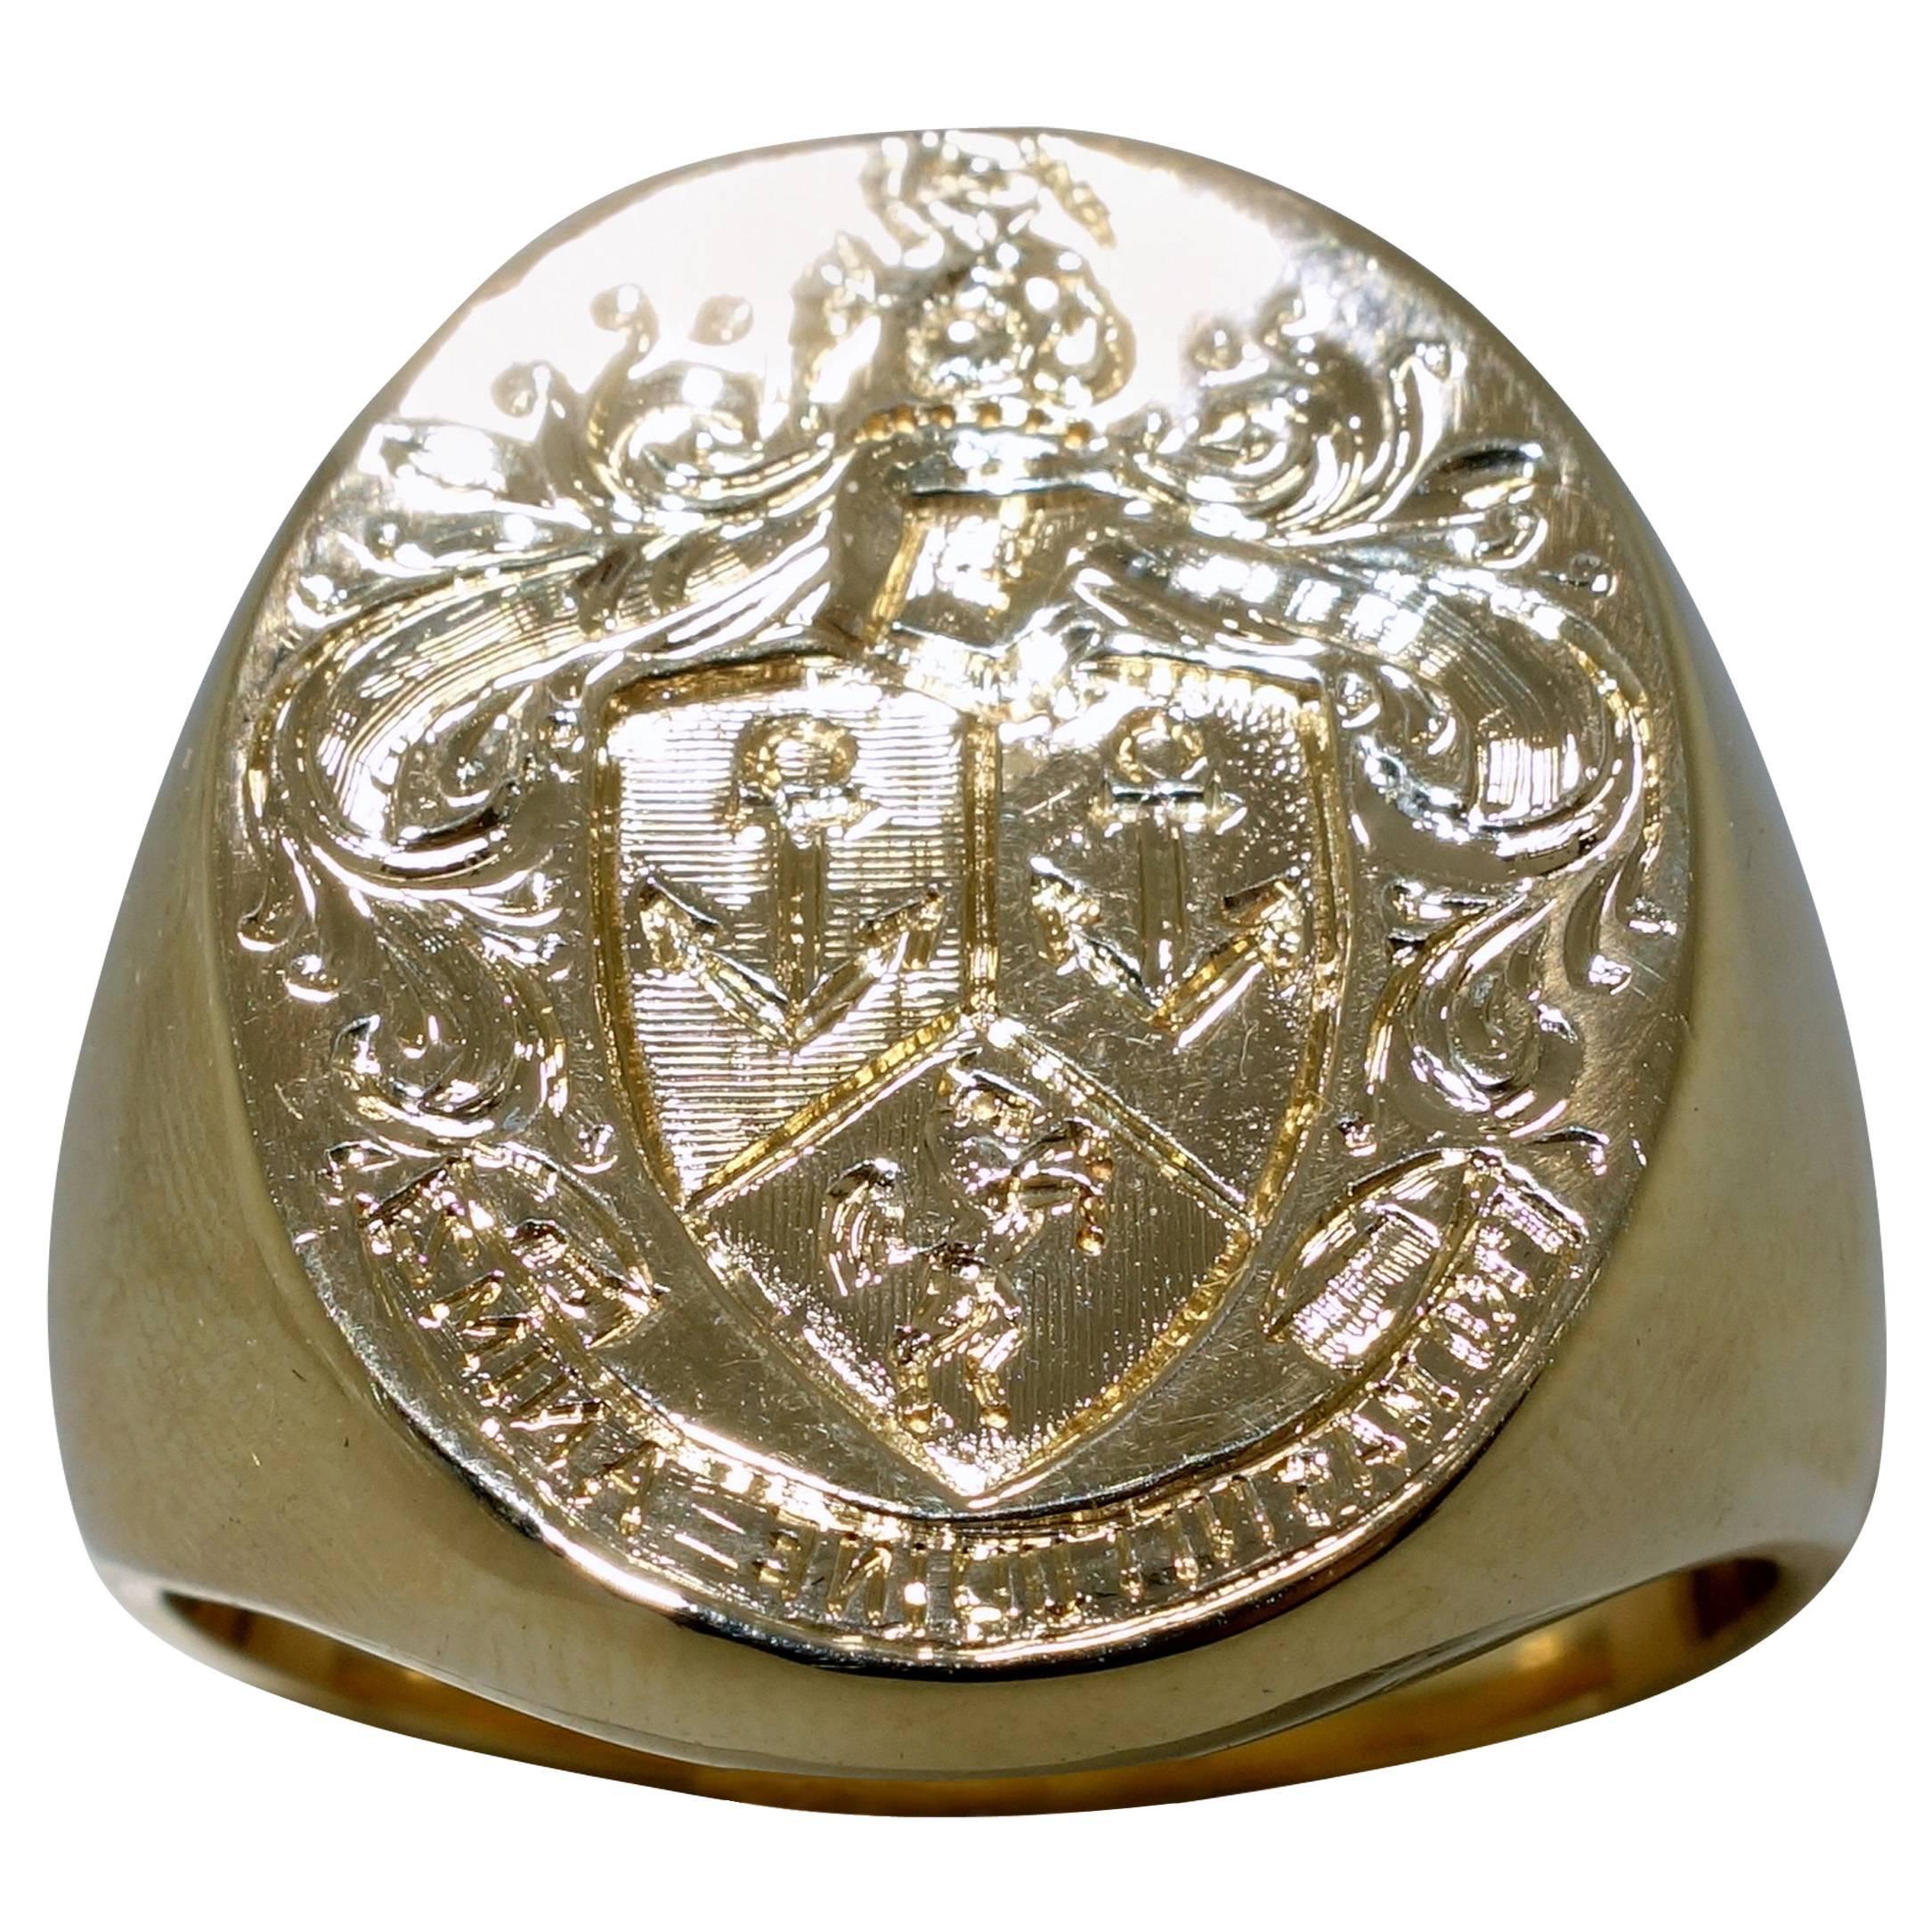 Coat of Arms Signet Ring